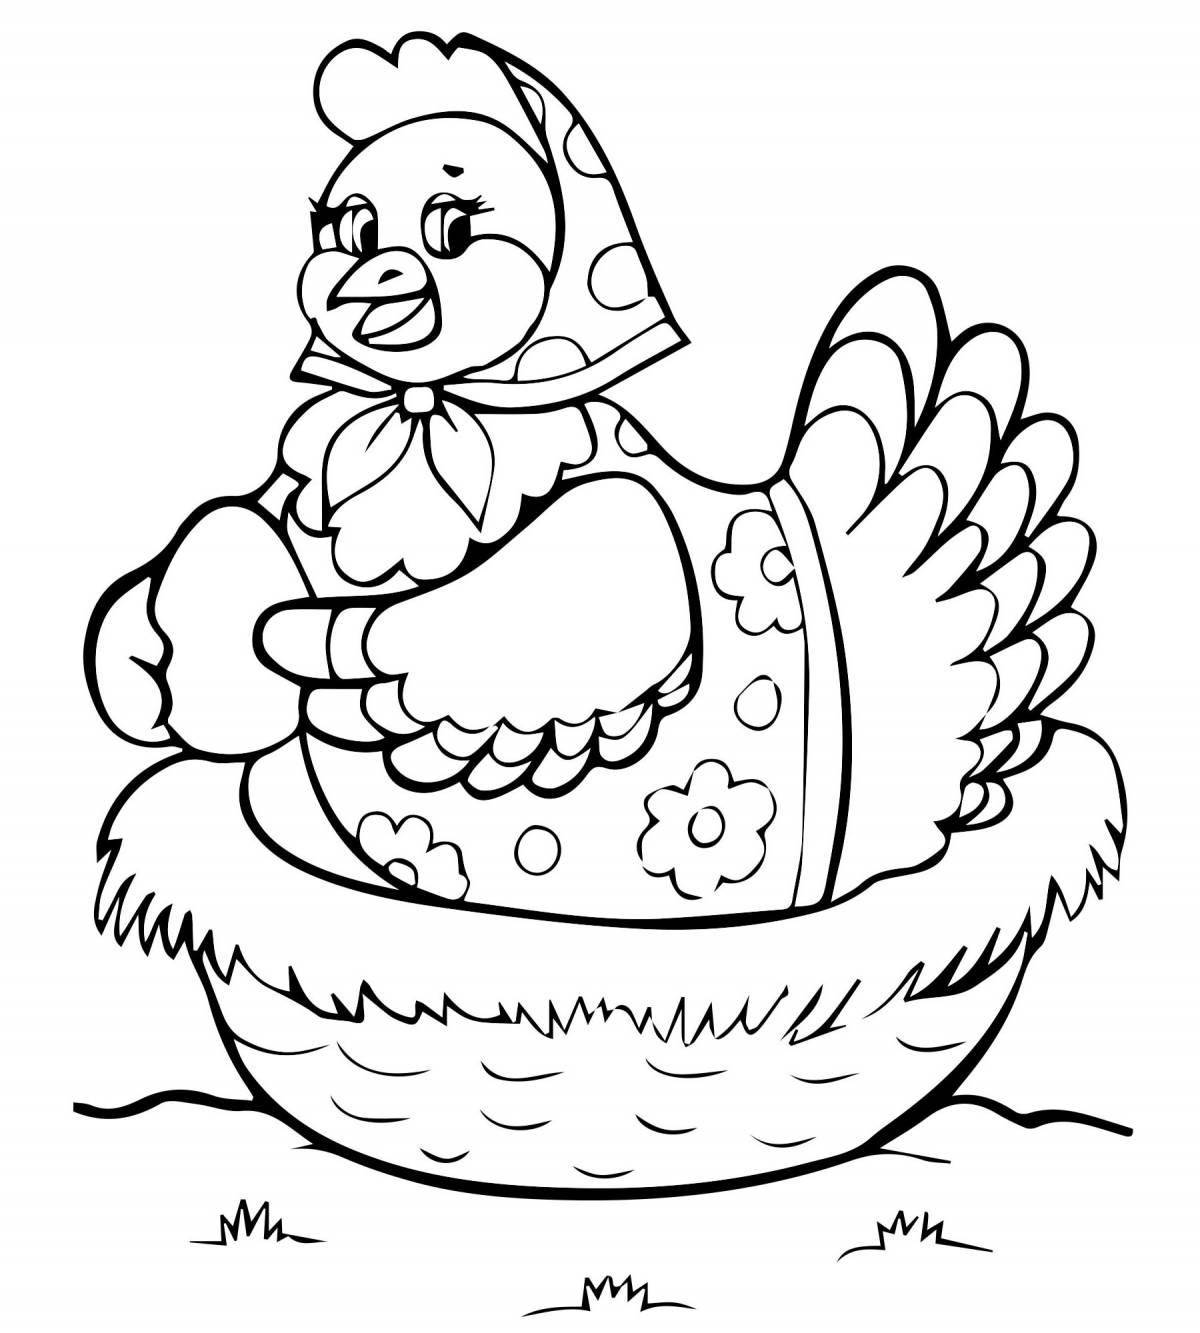 Glowing coloring pages heroes of Russian folk tales